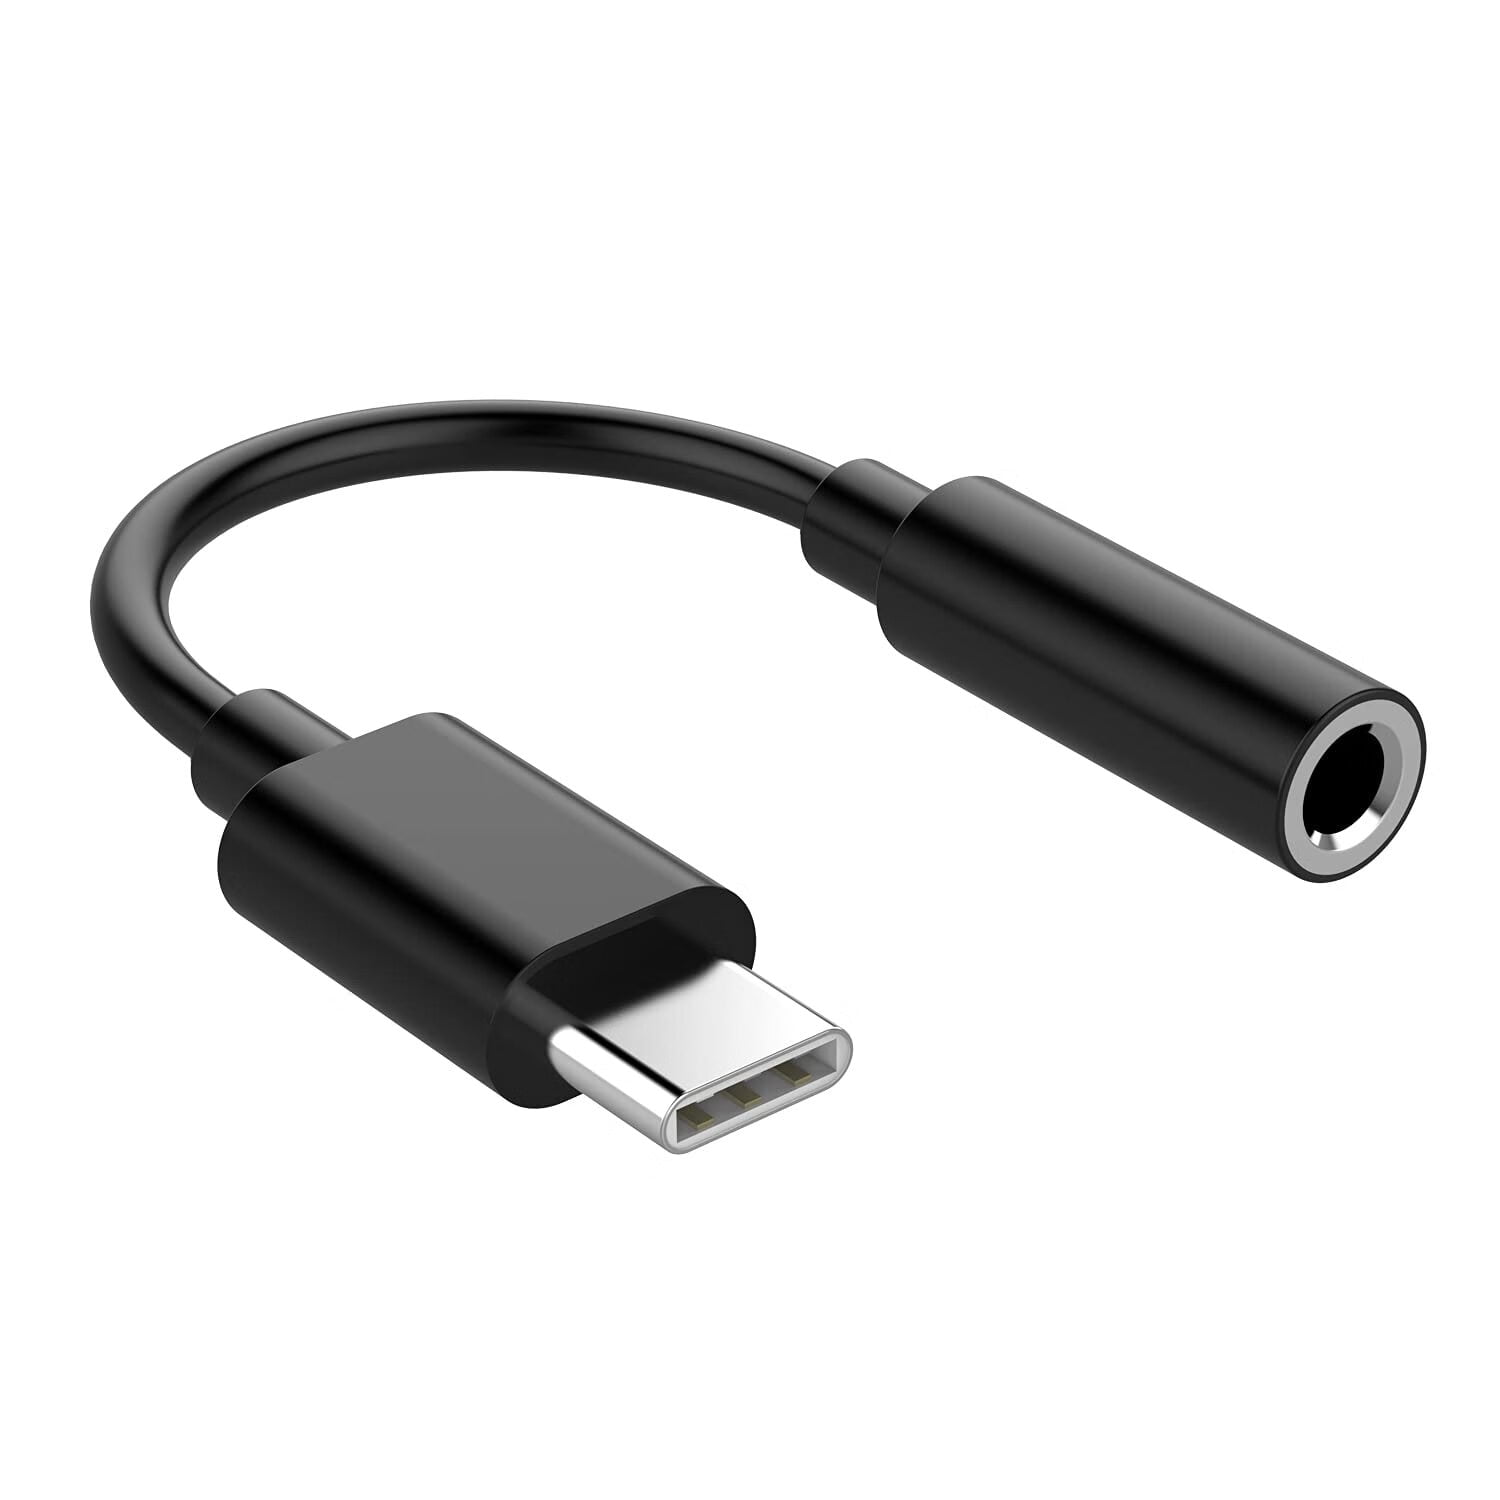  USB-C to 3.5mm Headphone Jack Adapter, Benfei USB Type-C to 3.5mm  Adapter Nylon Cable [DAC Hi-Res] Compatible with iPad Pro New 2018 2019,  Pixle 2/XL/3,HTC, Samsung S10/S8/S9/Note 8 - Black 